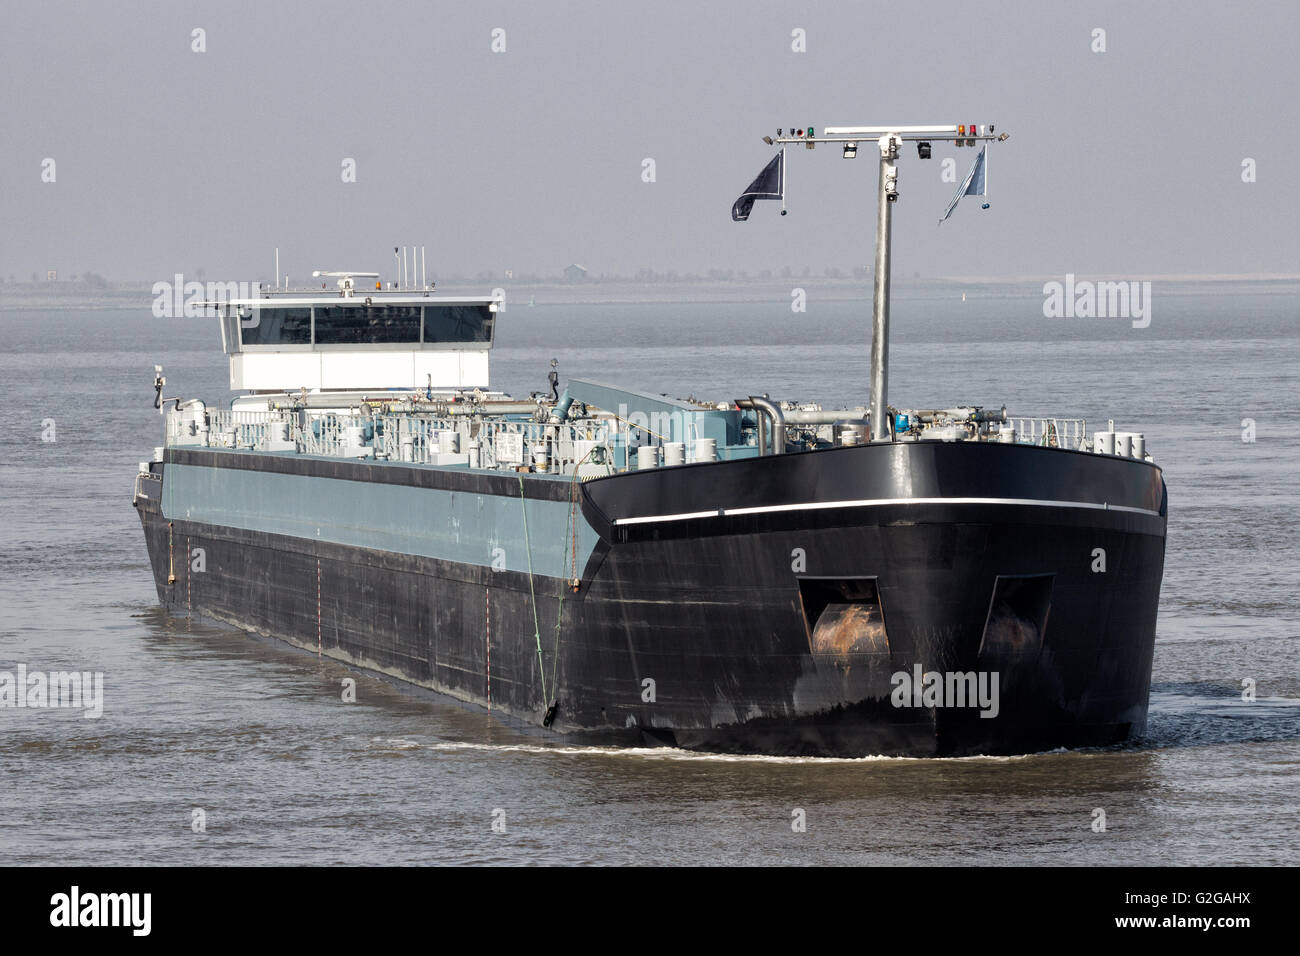 Tanker barge approaching the Port of Antwerp. Stock Photo